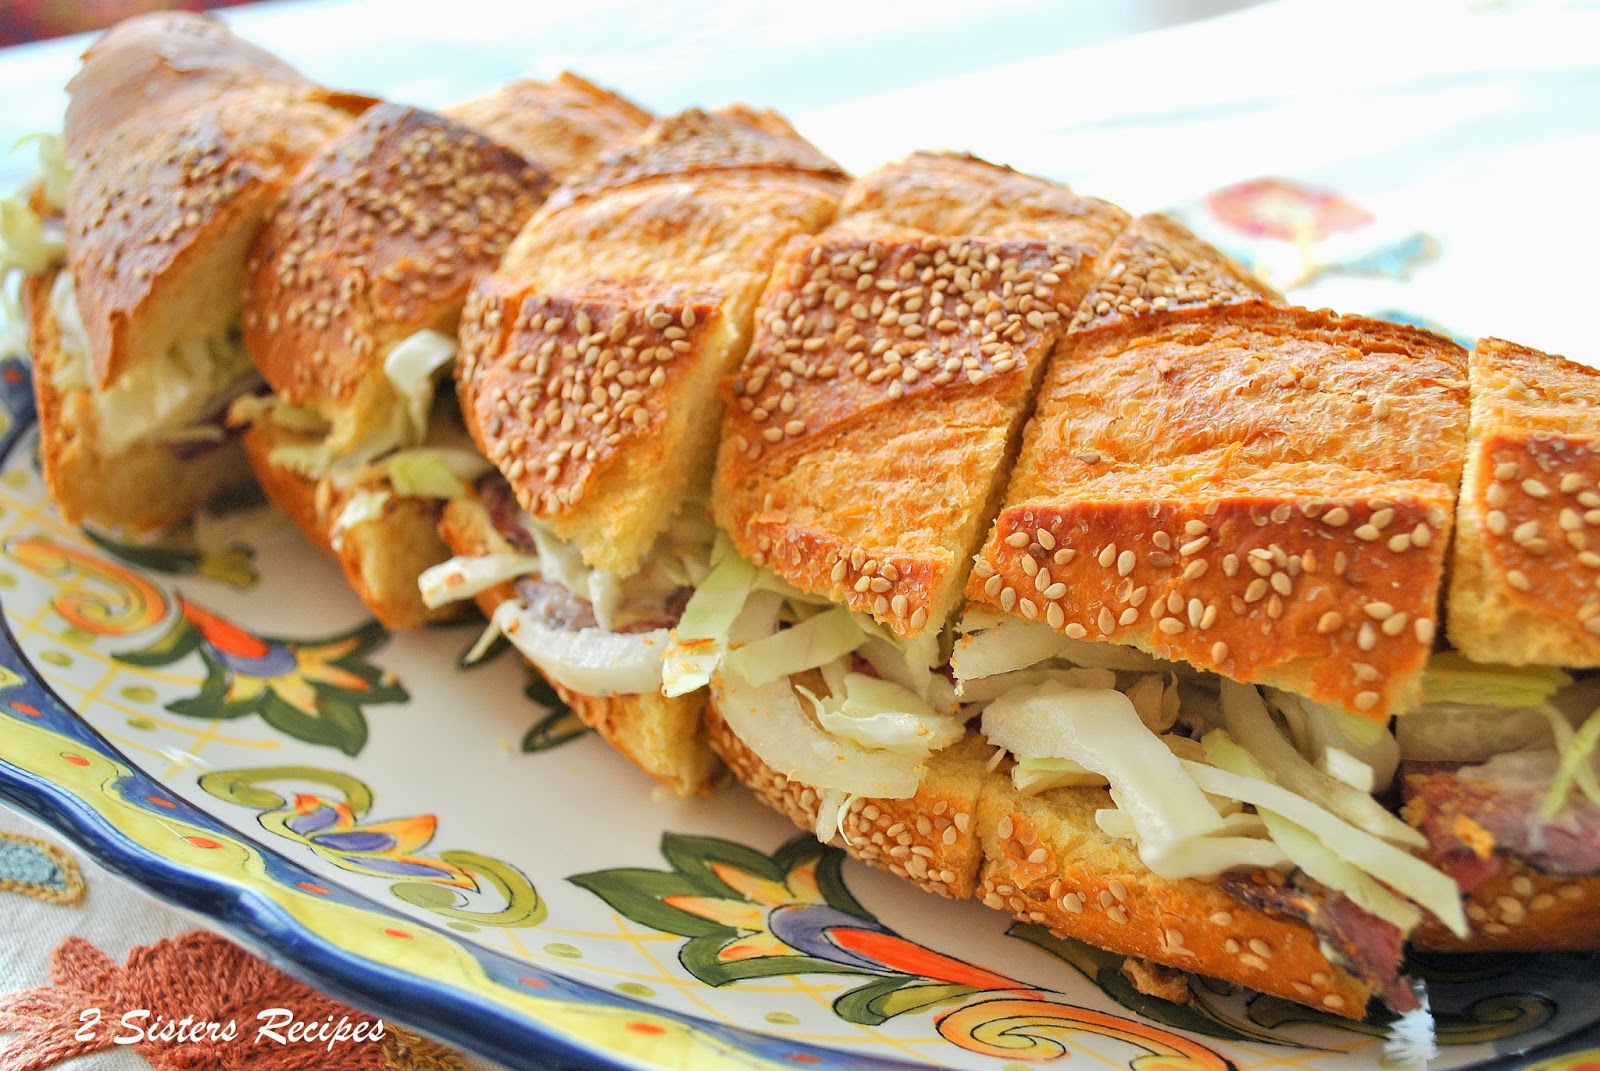 A loaf of bread stuffed with meat and lettuce, slaw and sliced into mini sandwiches.